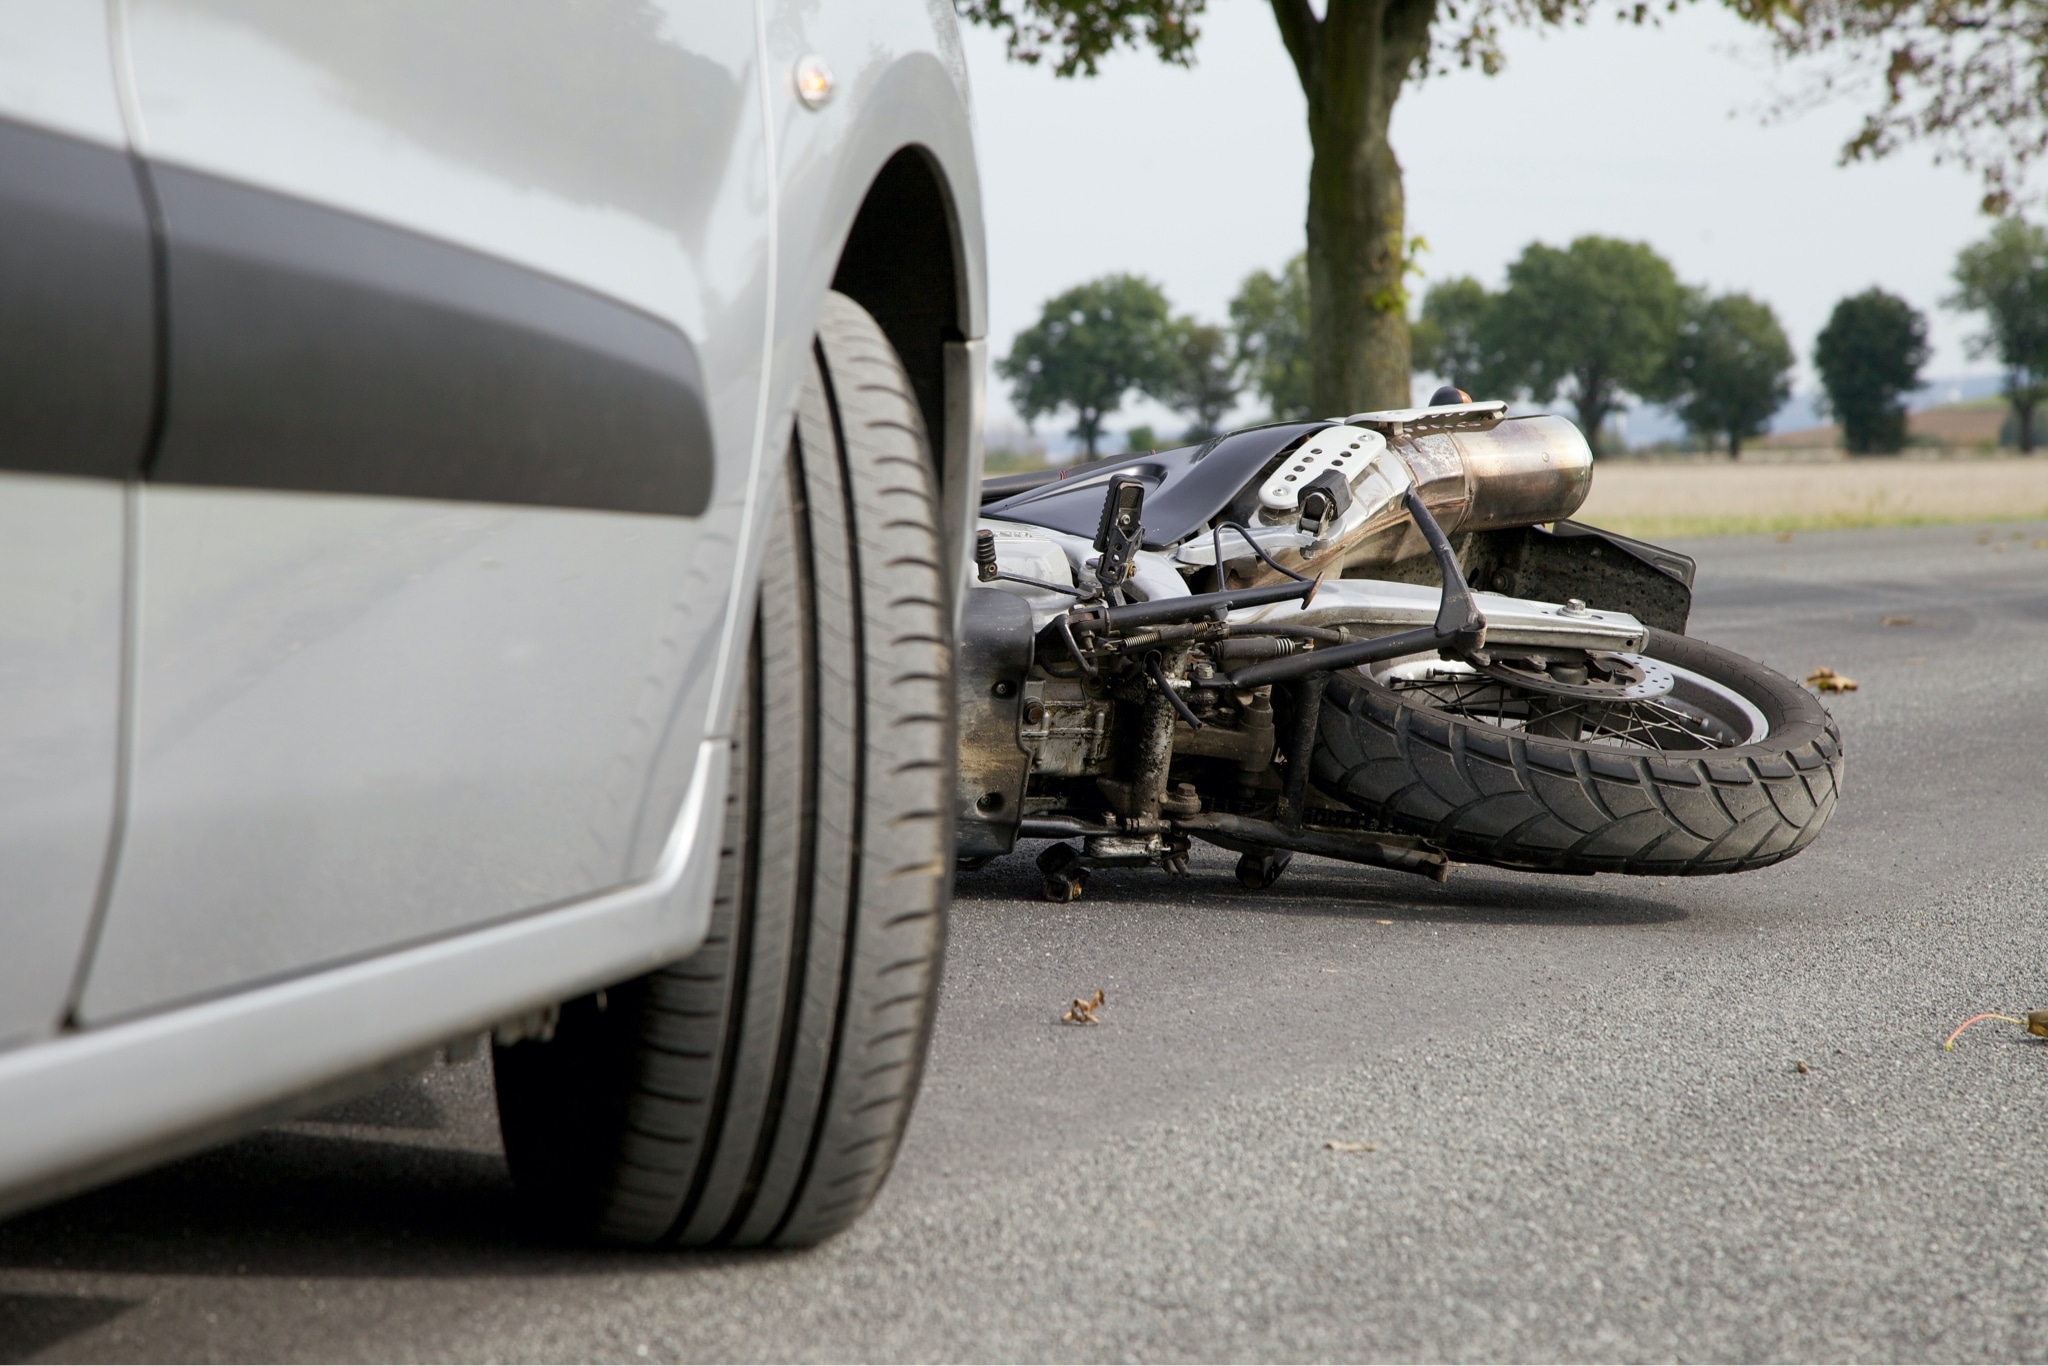 6 Things You Should Do After a Motorcycle Accident